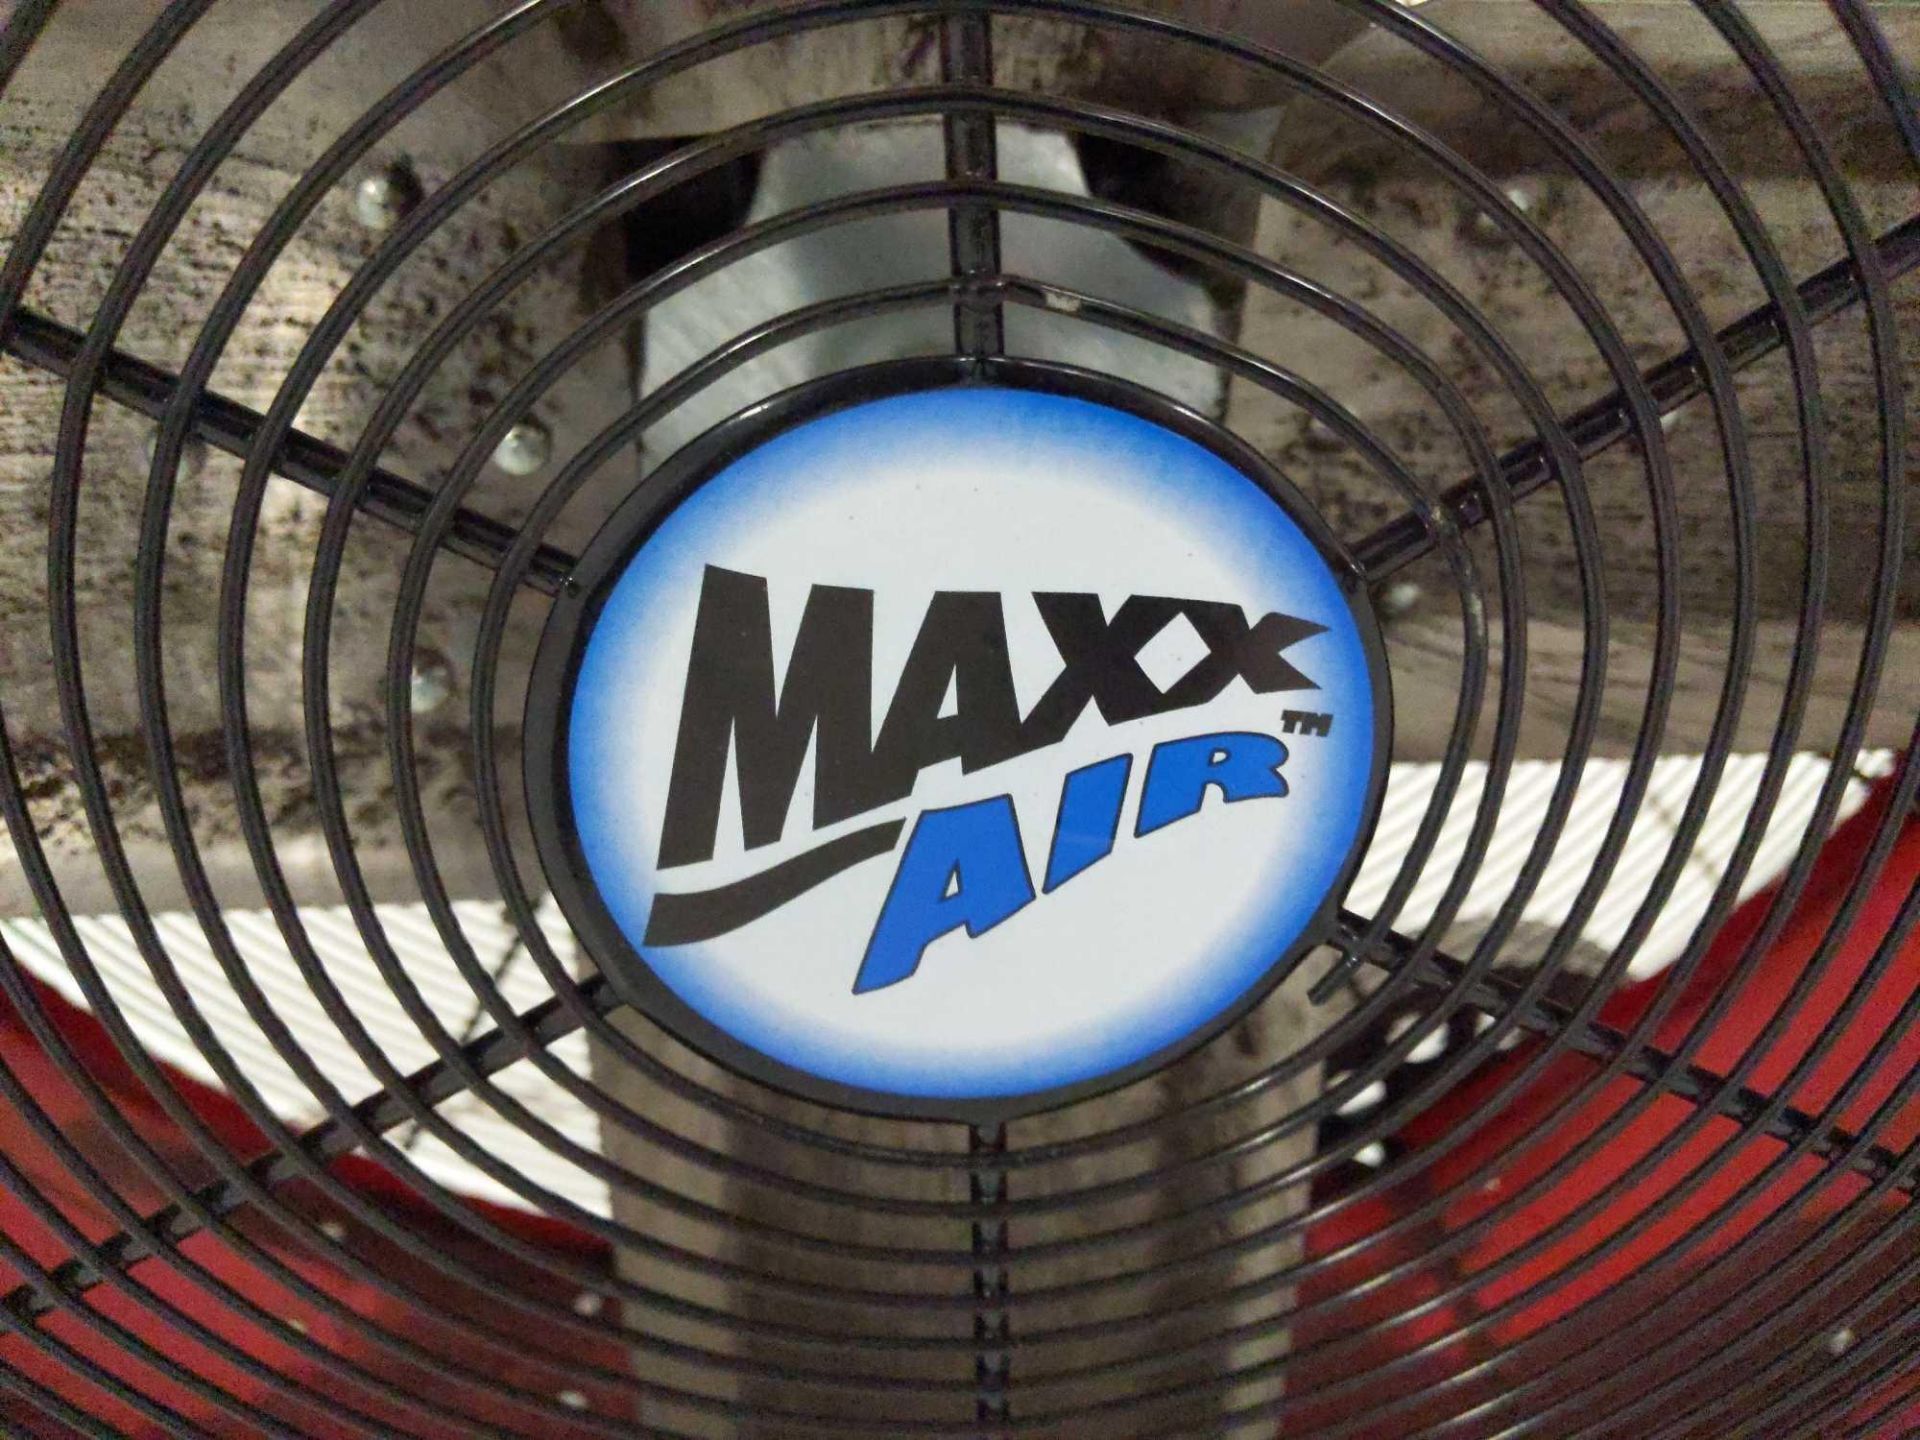 2 Maxx Air Fans with Wheels - Image 3 of 6